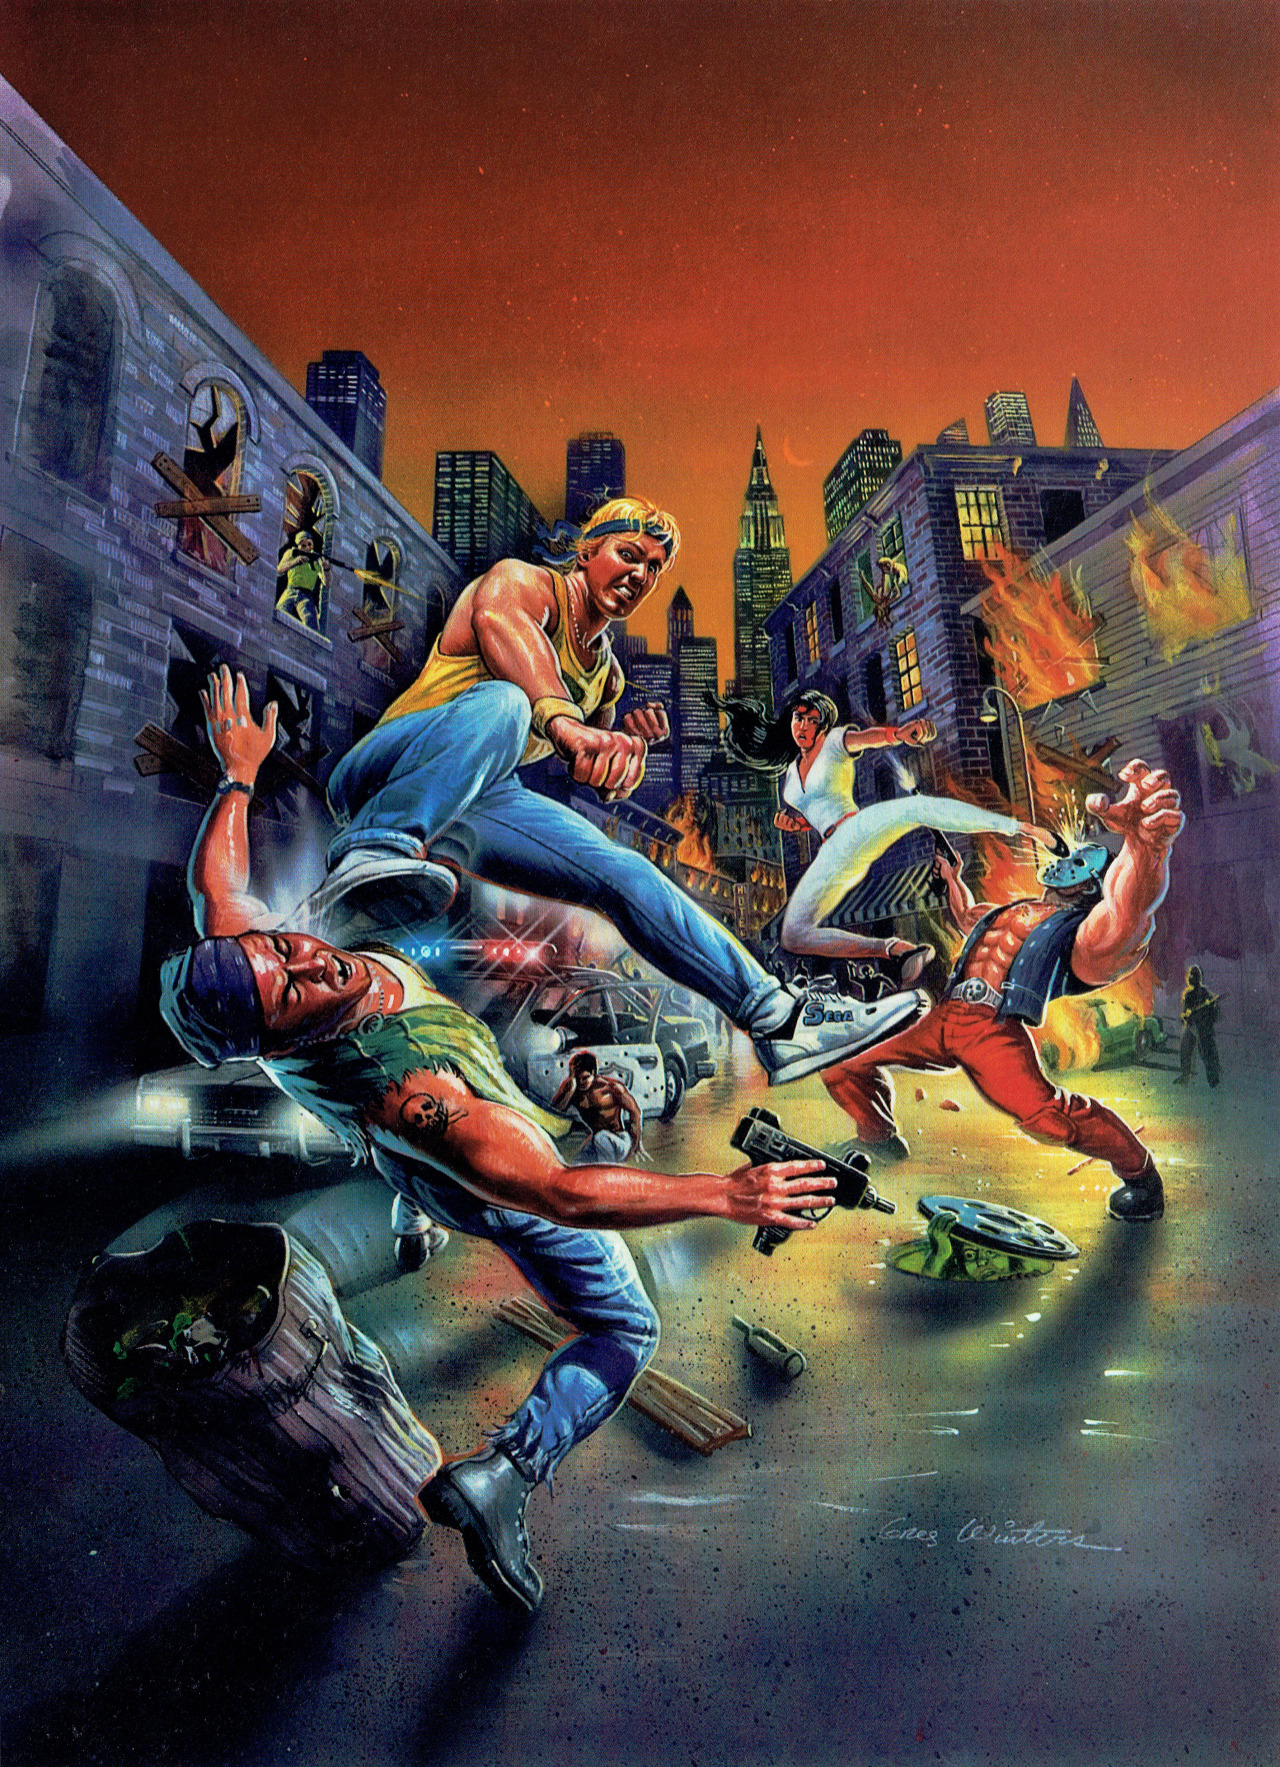 Streets of Rage Picture